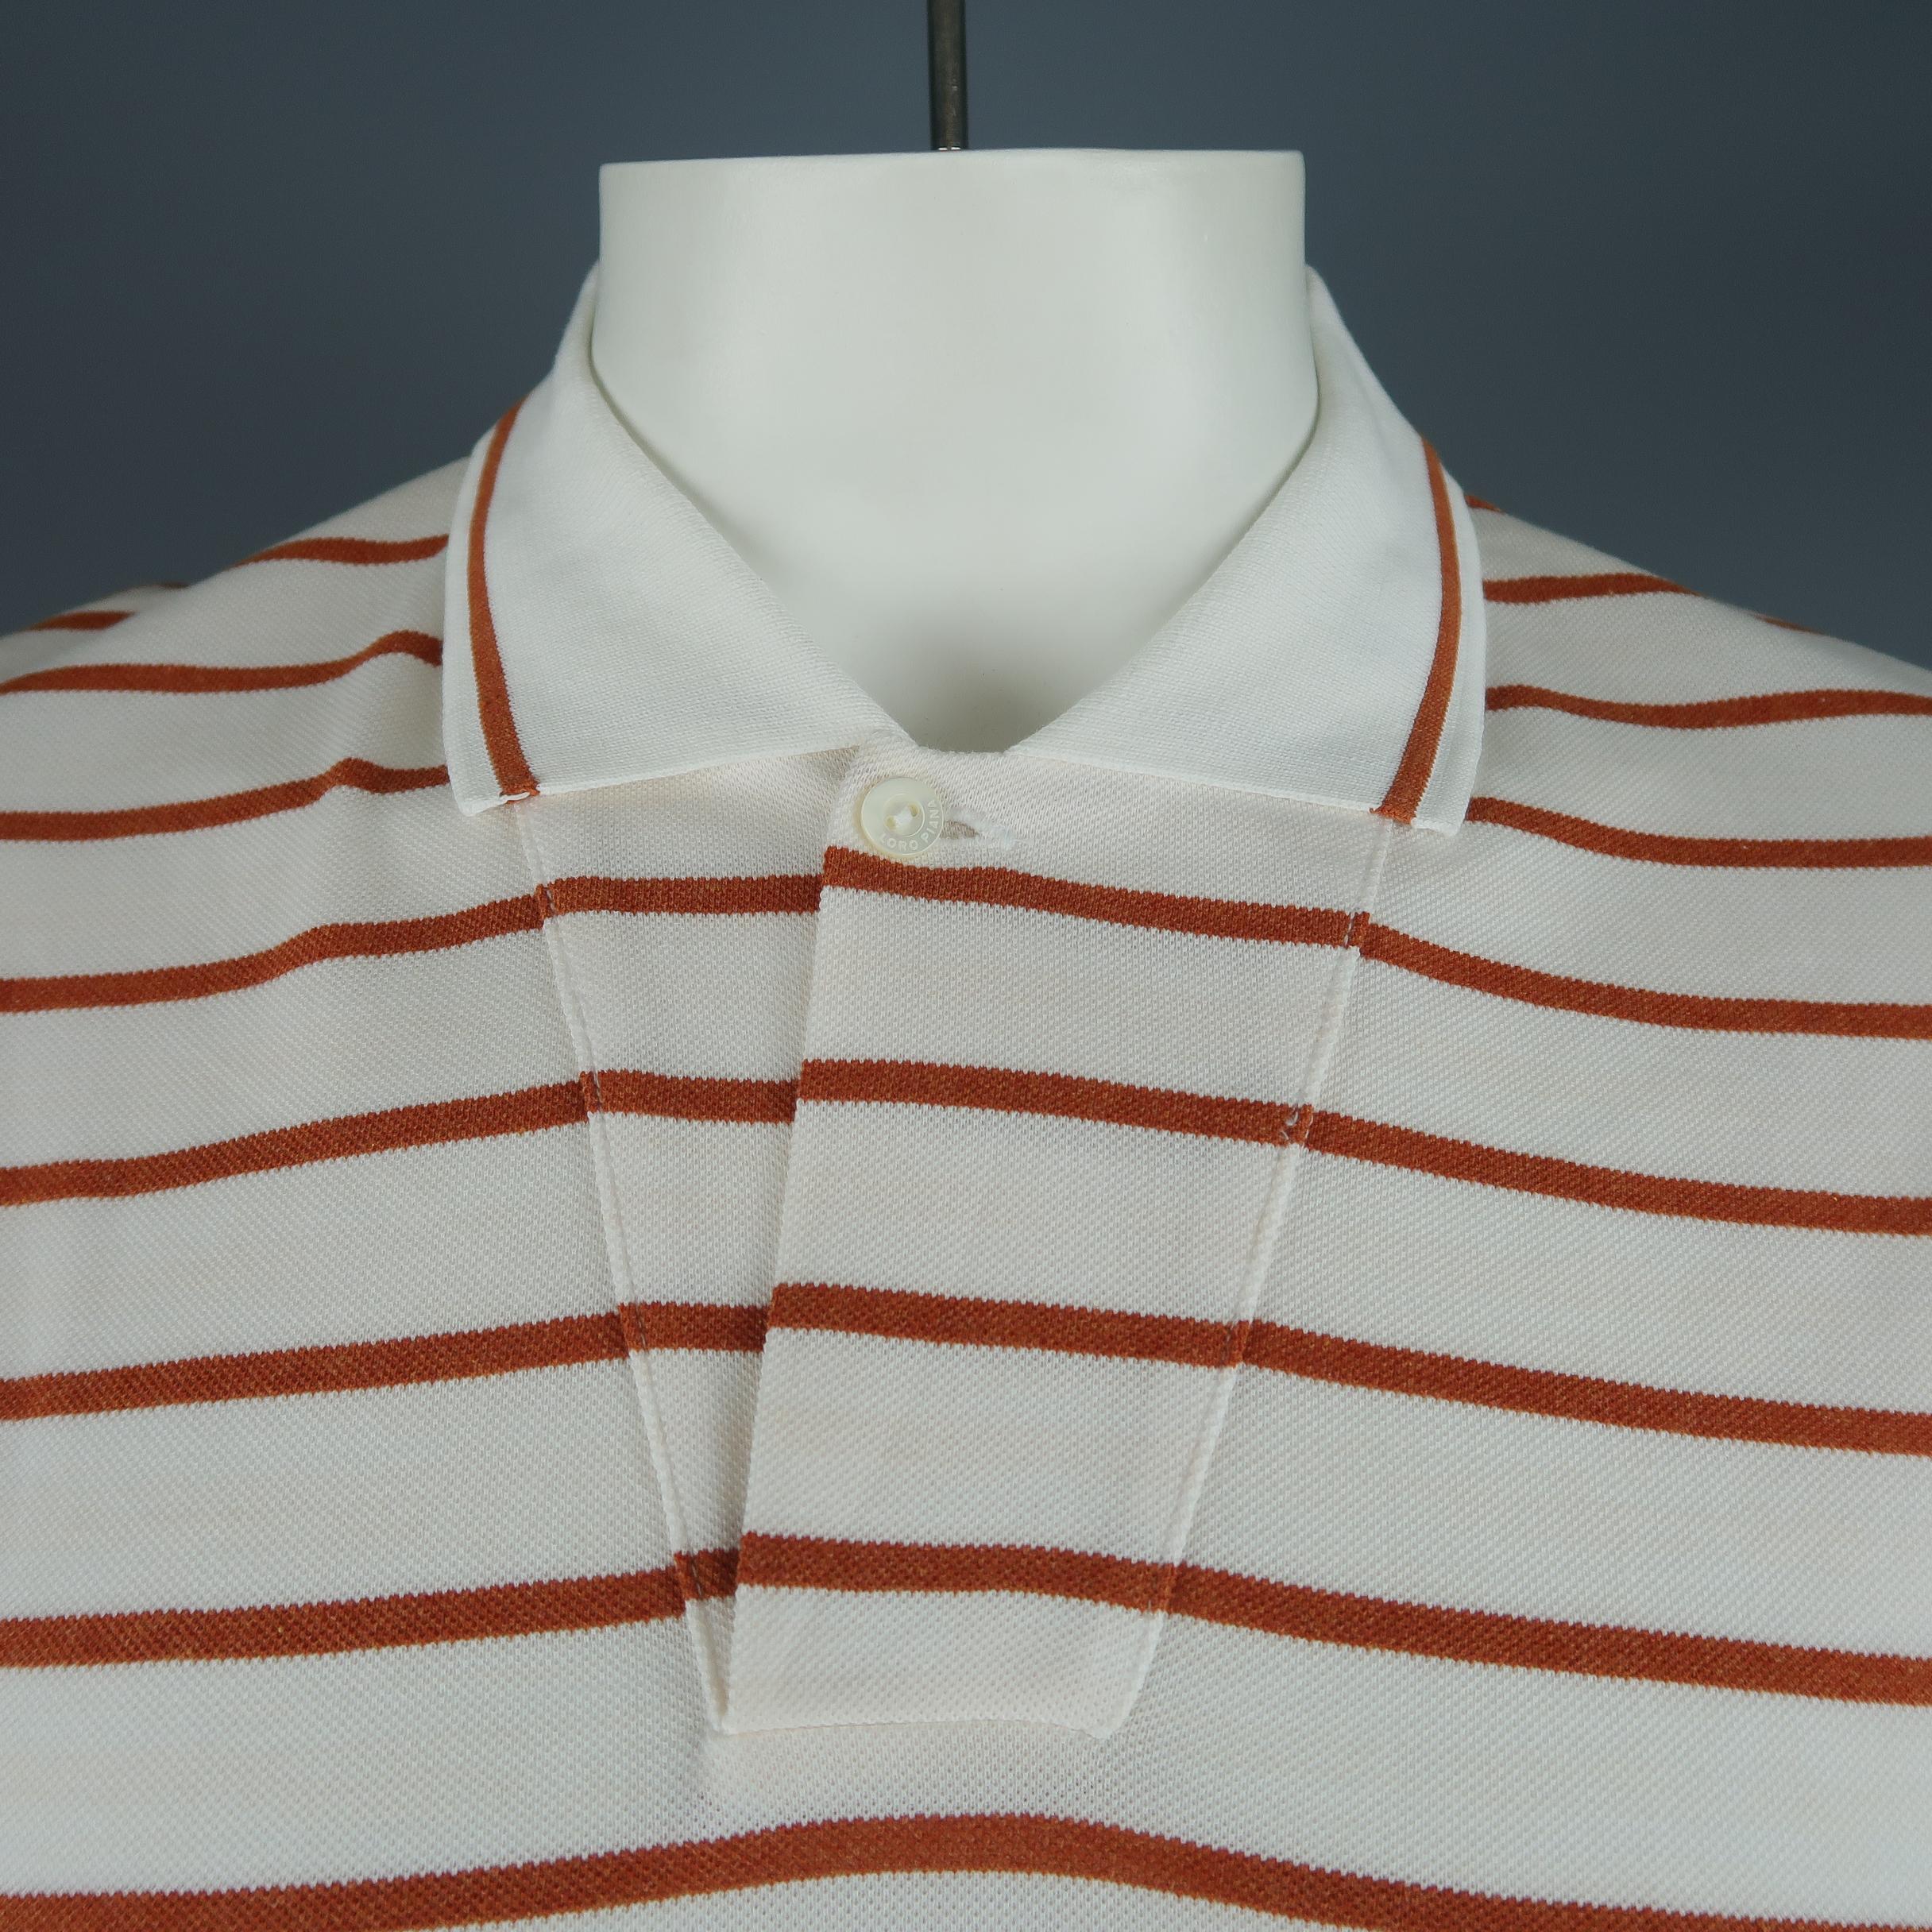 LORO PIANA polo comes in cream and burnt orange striped cotton pique with a single button collar. Made in Italy.
 
New with Tags.
Marked: XXL
 
Measurements:
 
Shoulder: 19 in.
Chest: 46 in.
Sleeve: 10 in.
Length: 29 in.